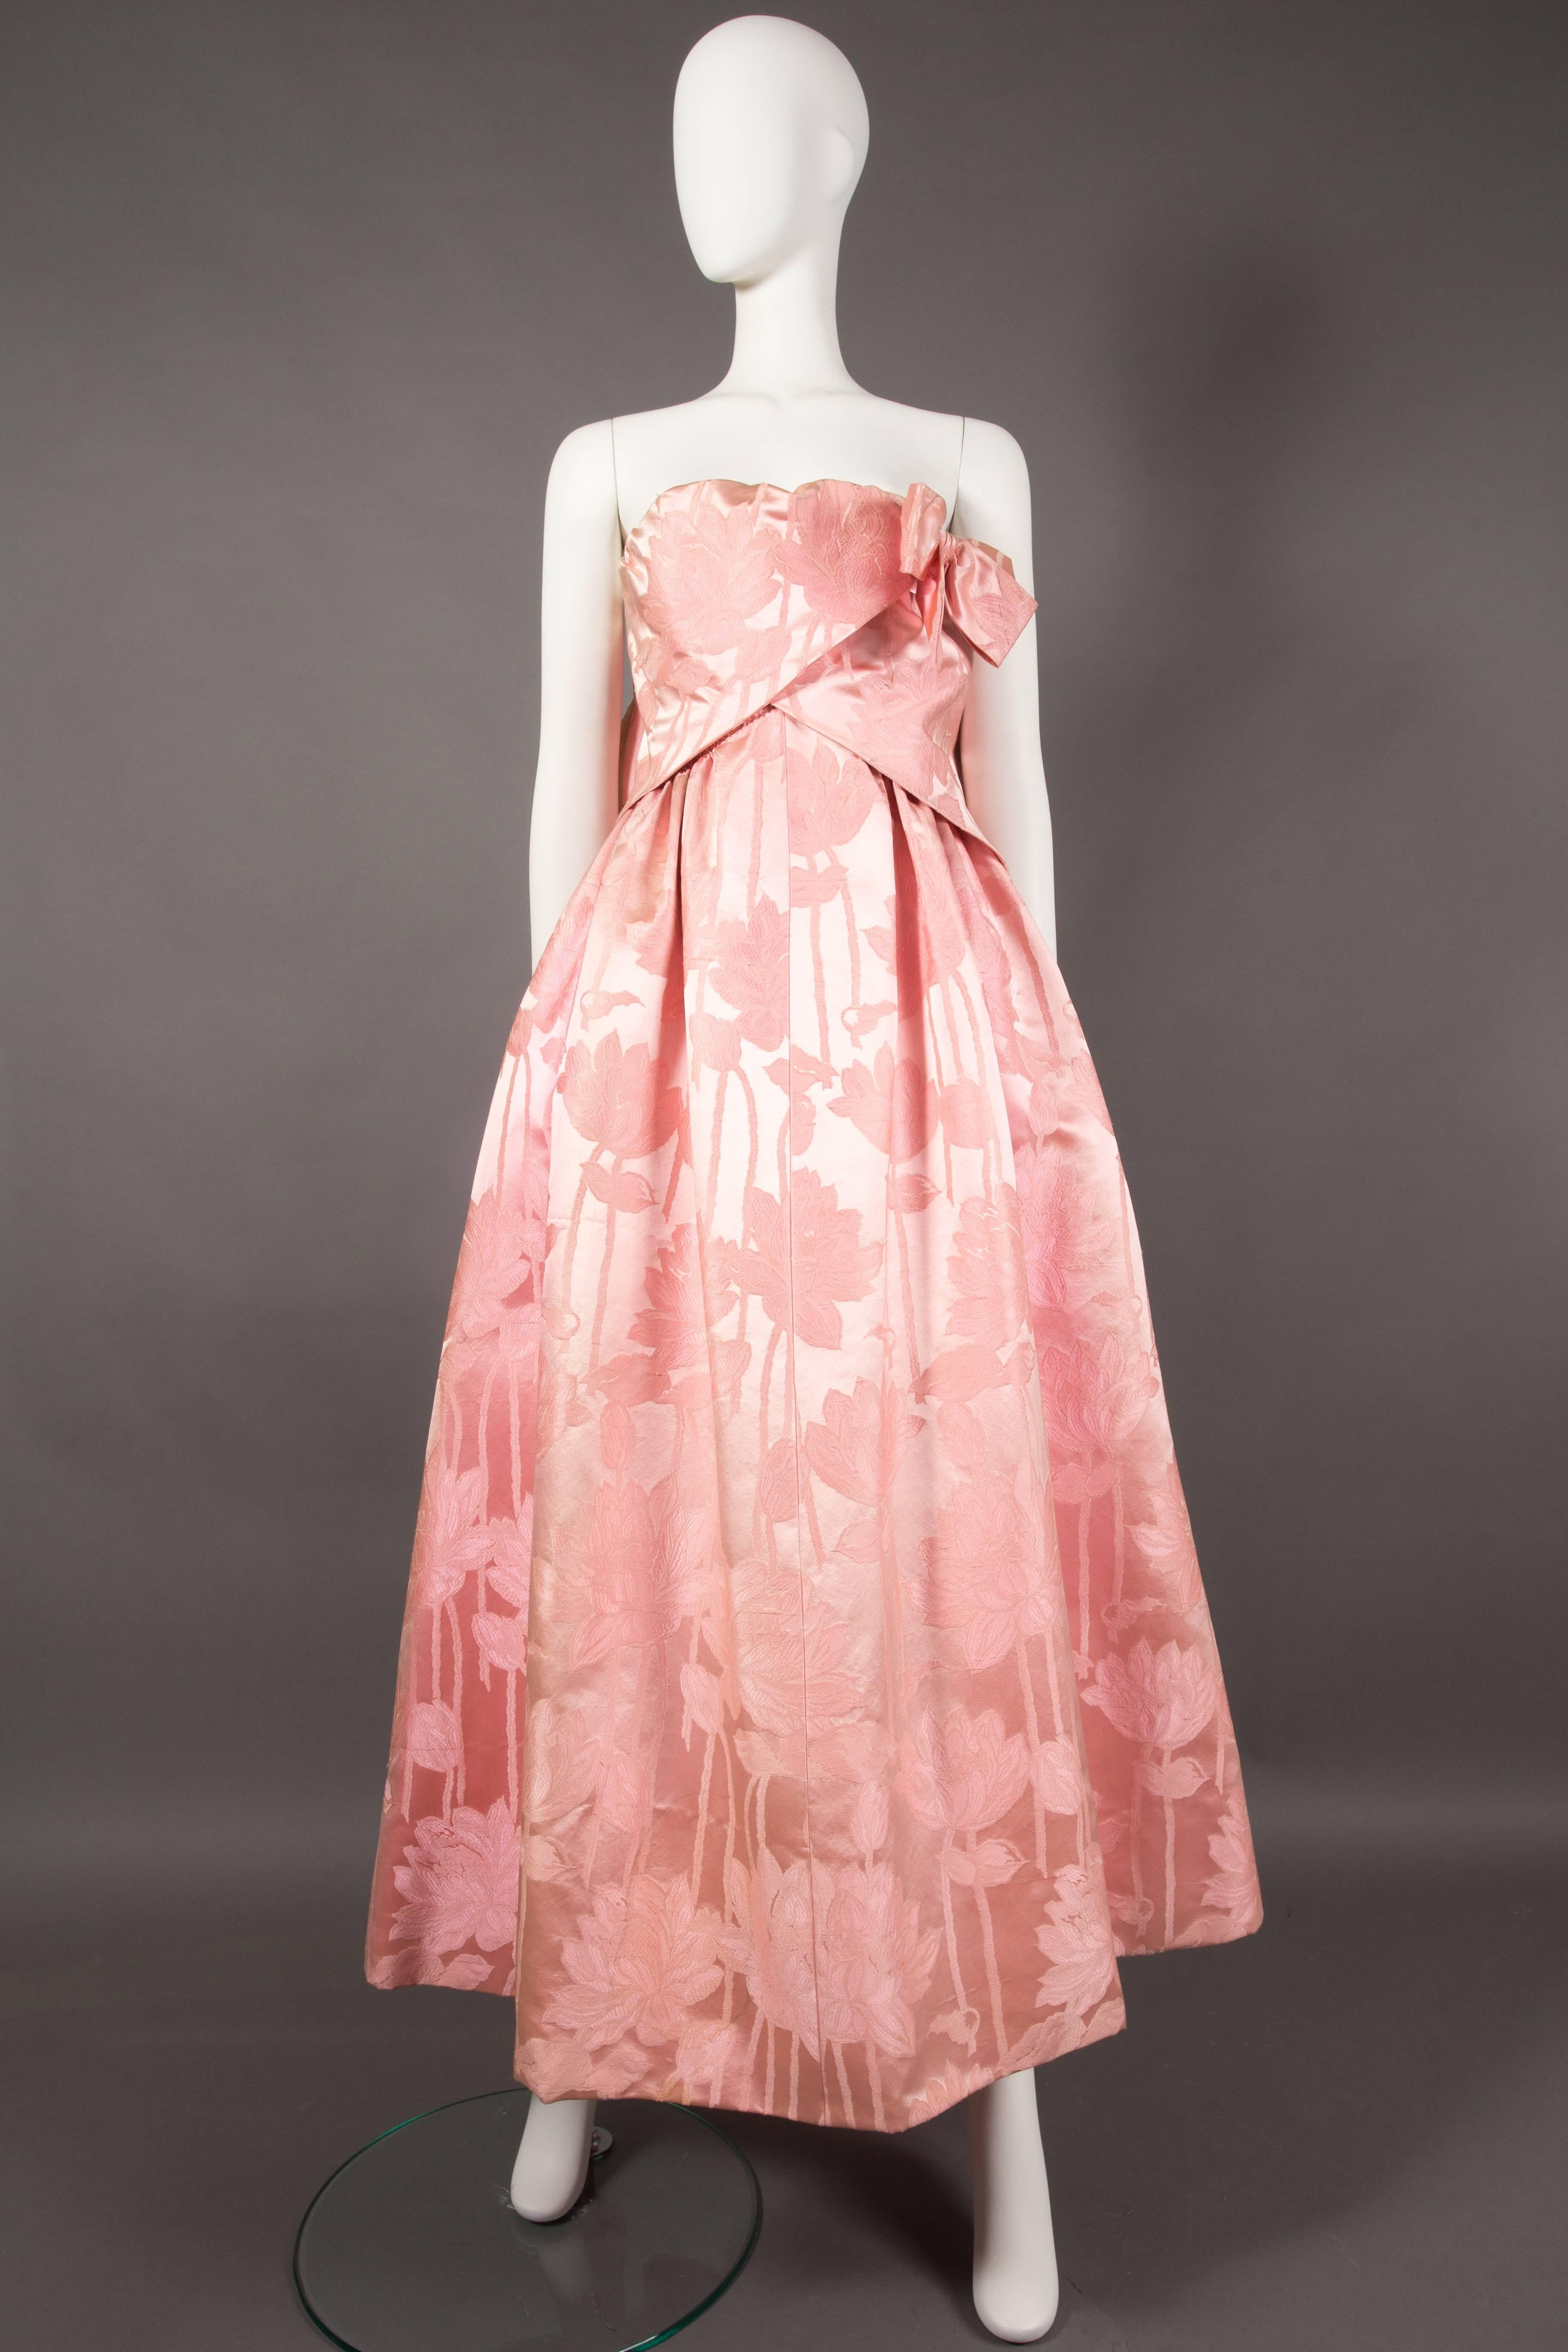 An exquisite and extremely rare haute couture Paul Daunay silk brocade evening gown, circa 1952-57. The dress features a full pleated skirt constructed in a fine silk brocade layered over a structered underskirt. The strapless bust has an internal